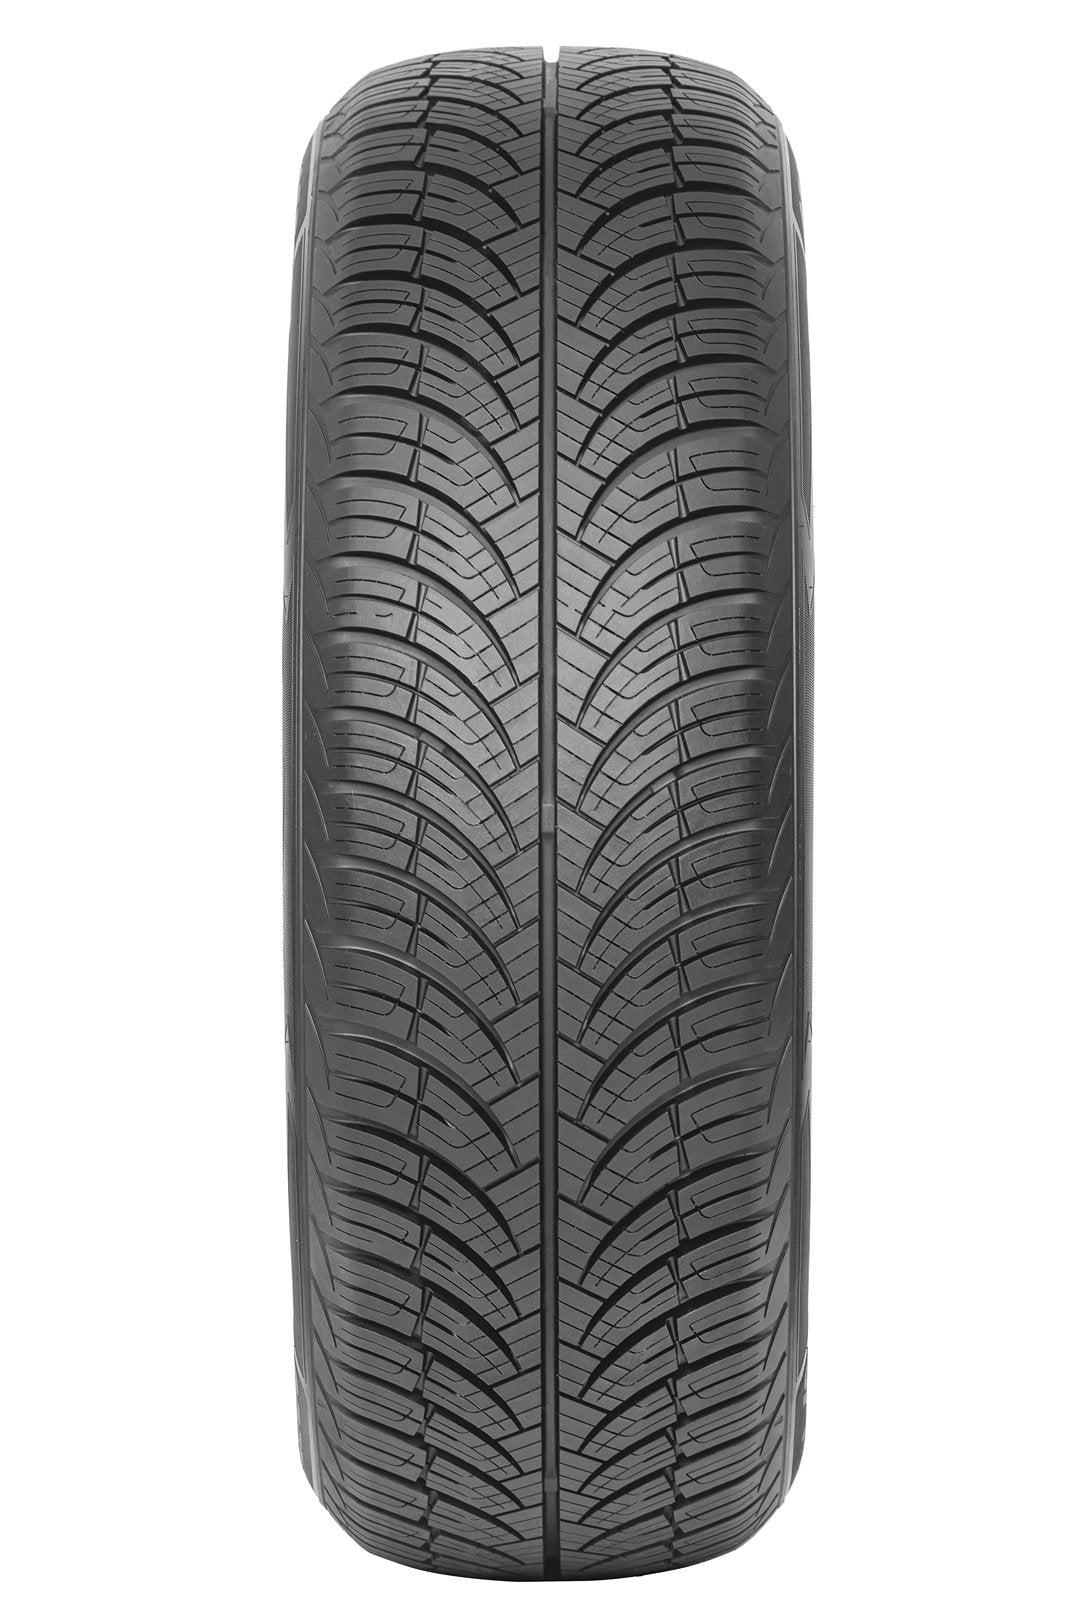 225/45R18 GRENLANDER GREENWING A/S ALL WEATHER - Toee Tire